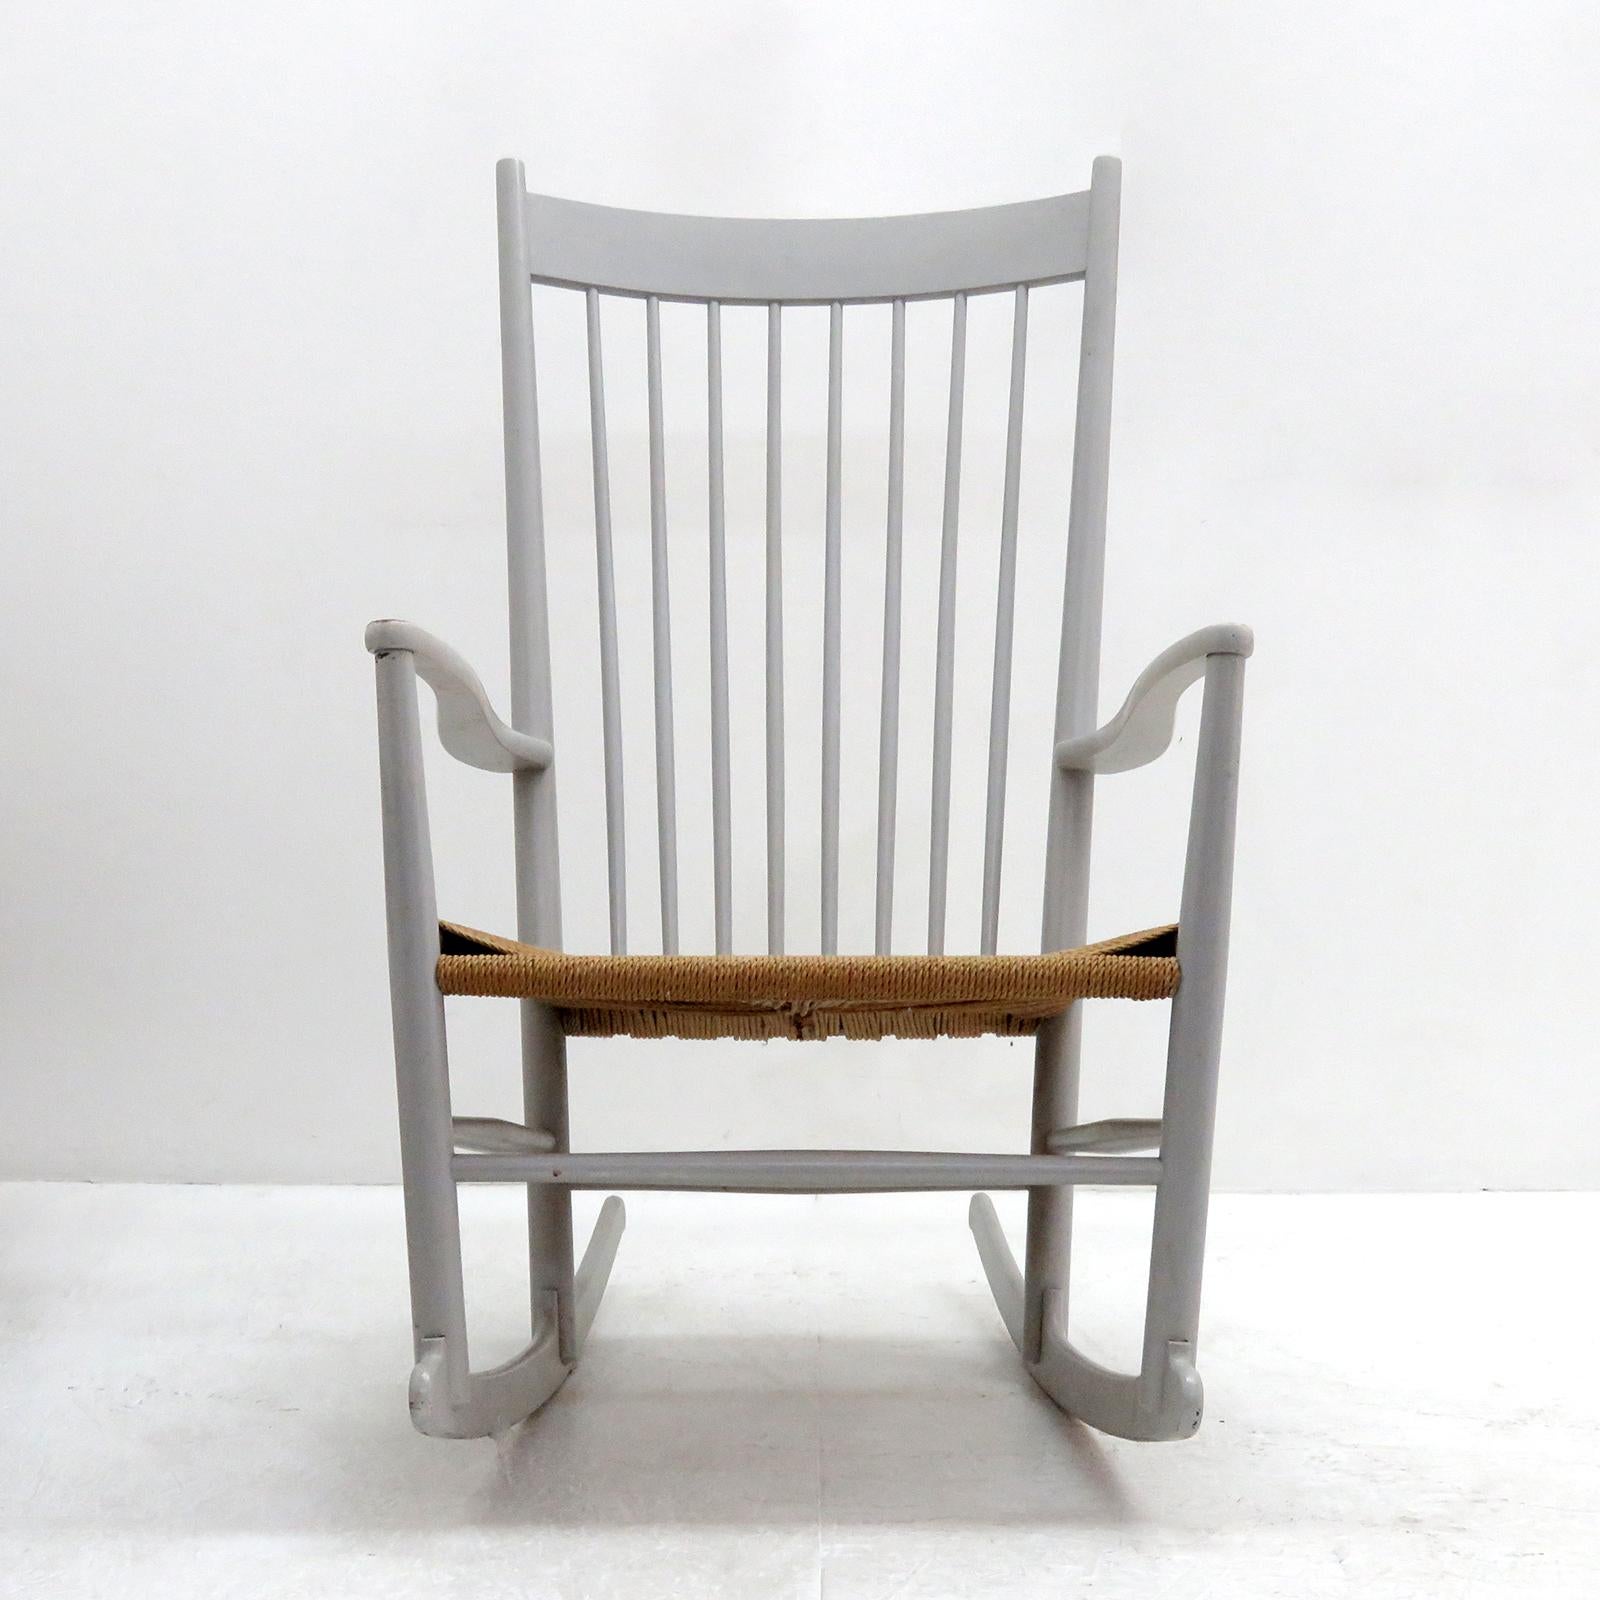 Wonderful model J16 rocking chair by Hans Wegner for FDB Møbler, designed in 1944, in light-gray painted beech with woven paper cord seat. This example was produced in 1961, features a tall spindle back, gracefully curvaceous arms and blade-style